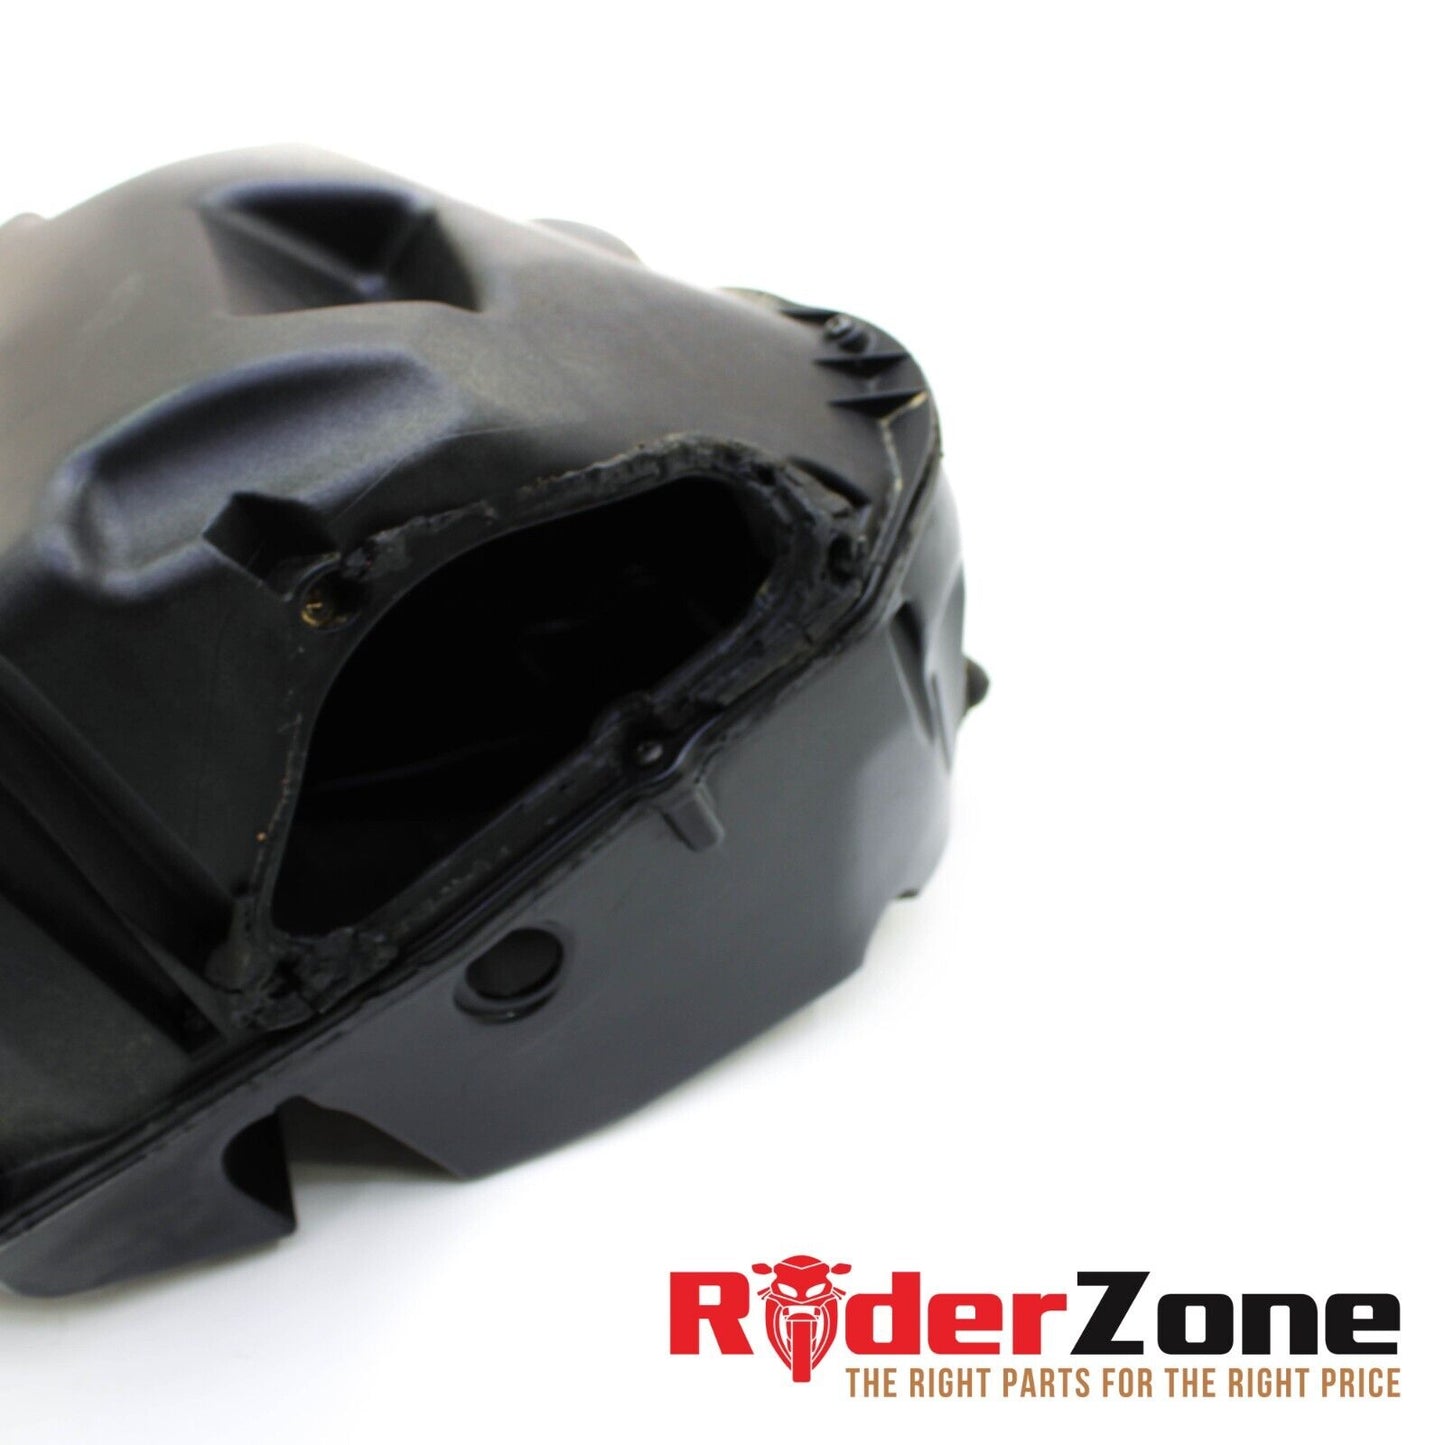 2003 - 2007 DUCATI 999 AIRBOX AIR FILTER HOUSING CLEANER UNIT BLACK STOCK